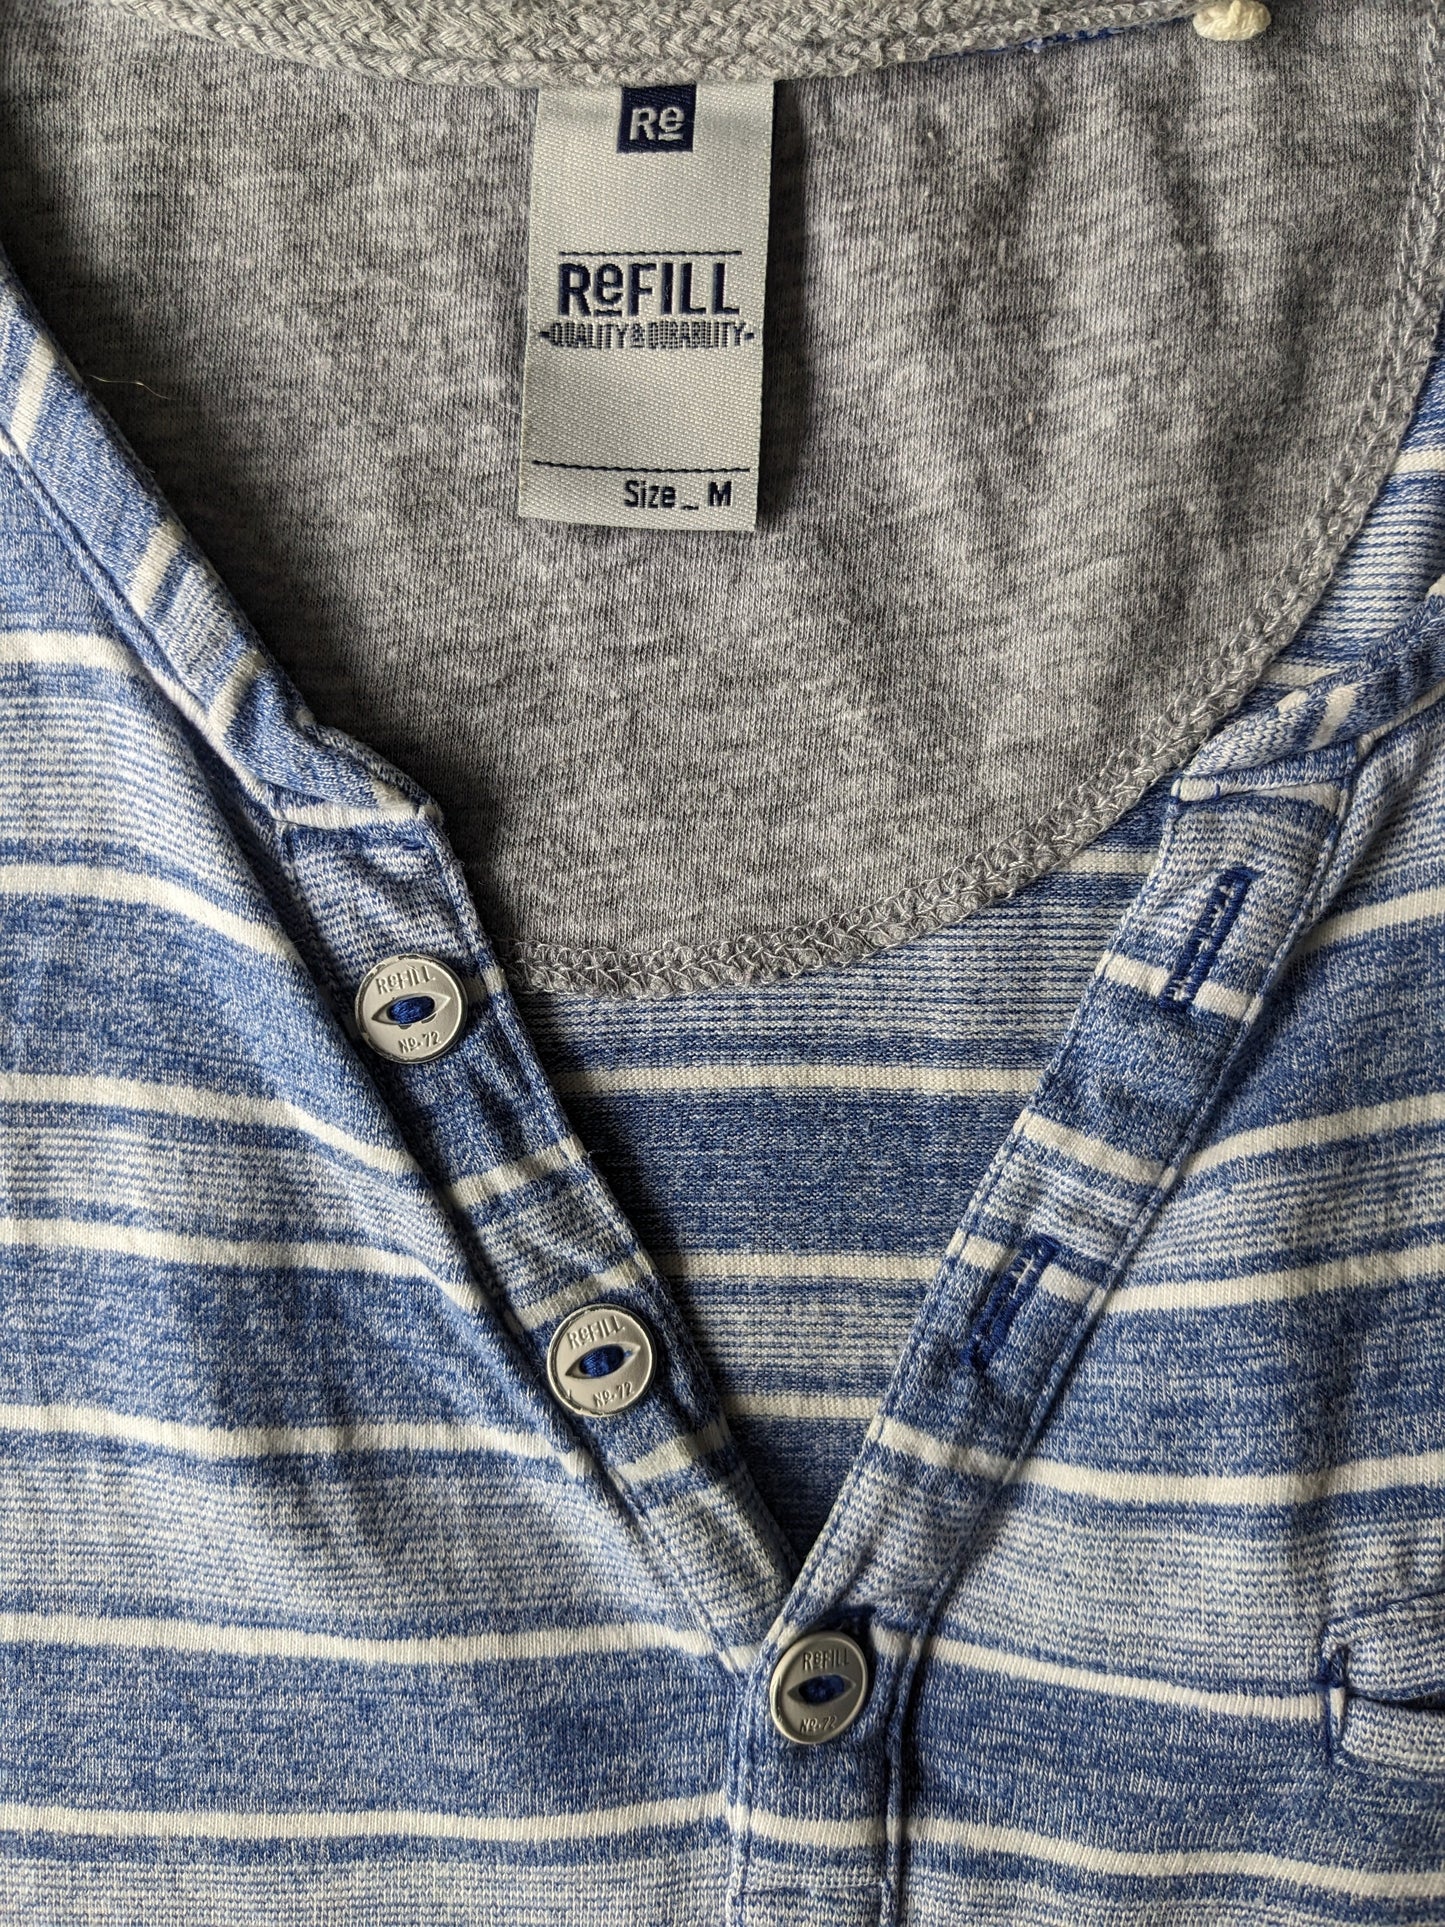 Refill shirt with V-neck and buttons. Blue white striped. Size M.